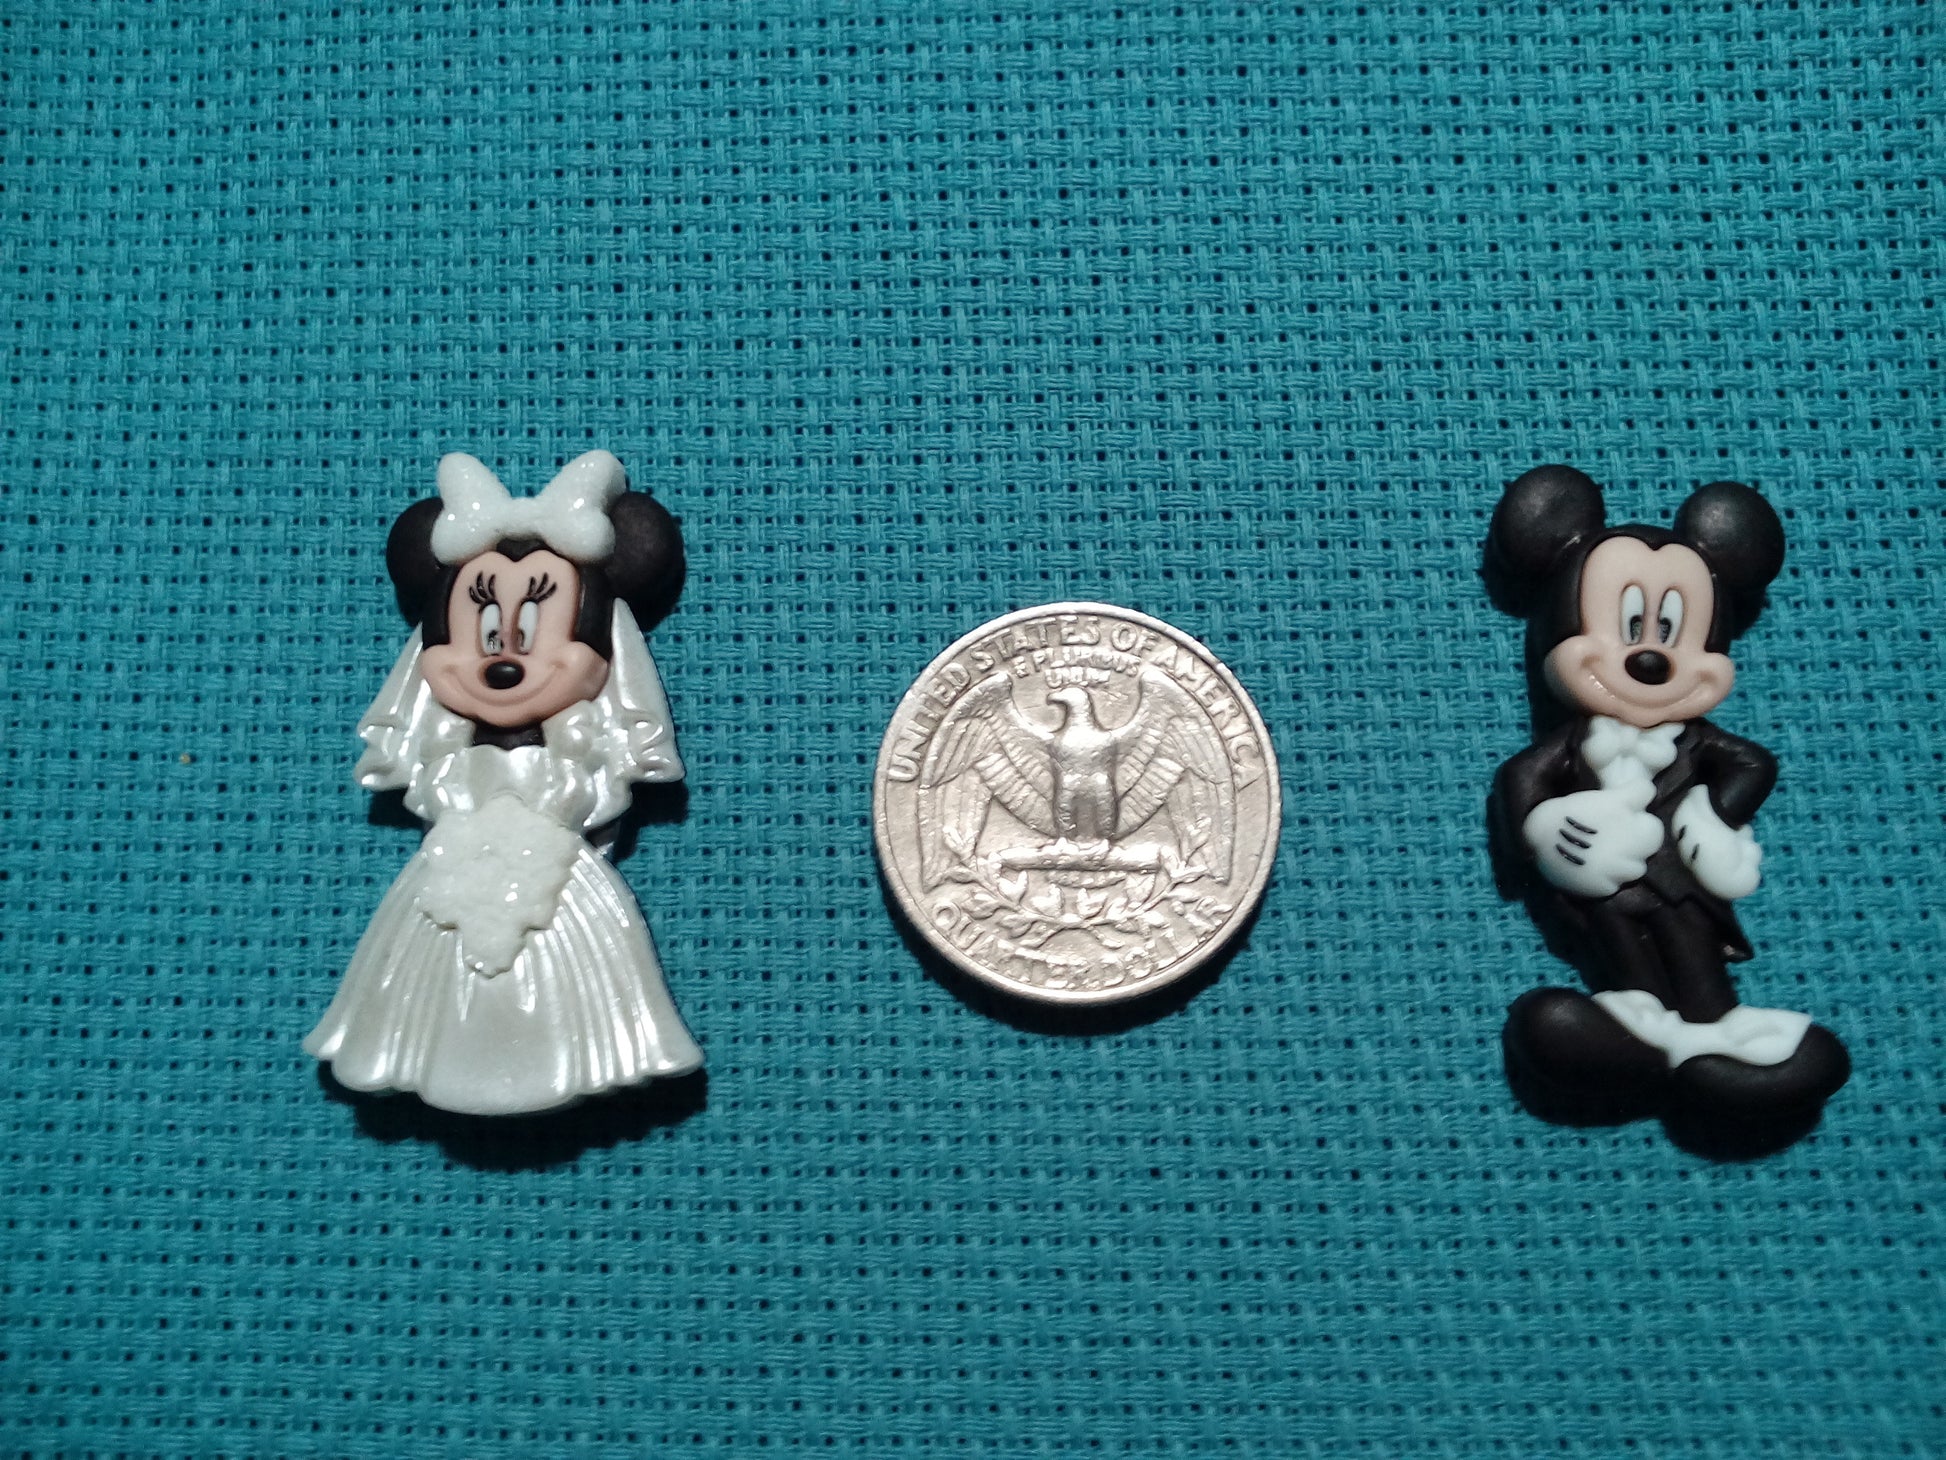 Mr & Mrs Mickey and Minnie mouse cross stitch needle minders